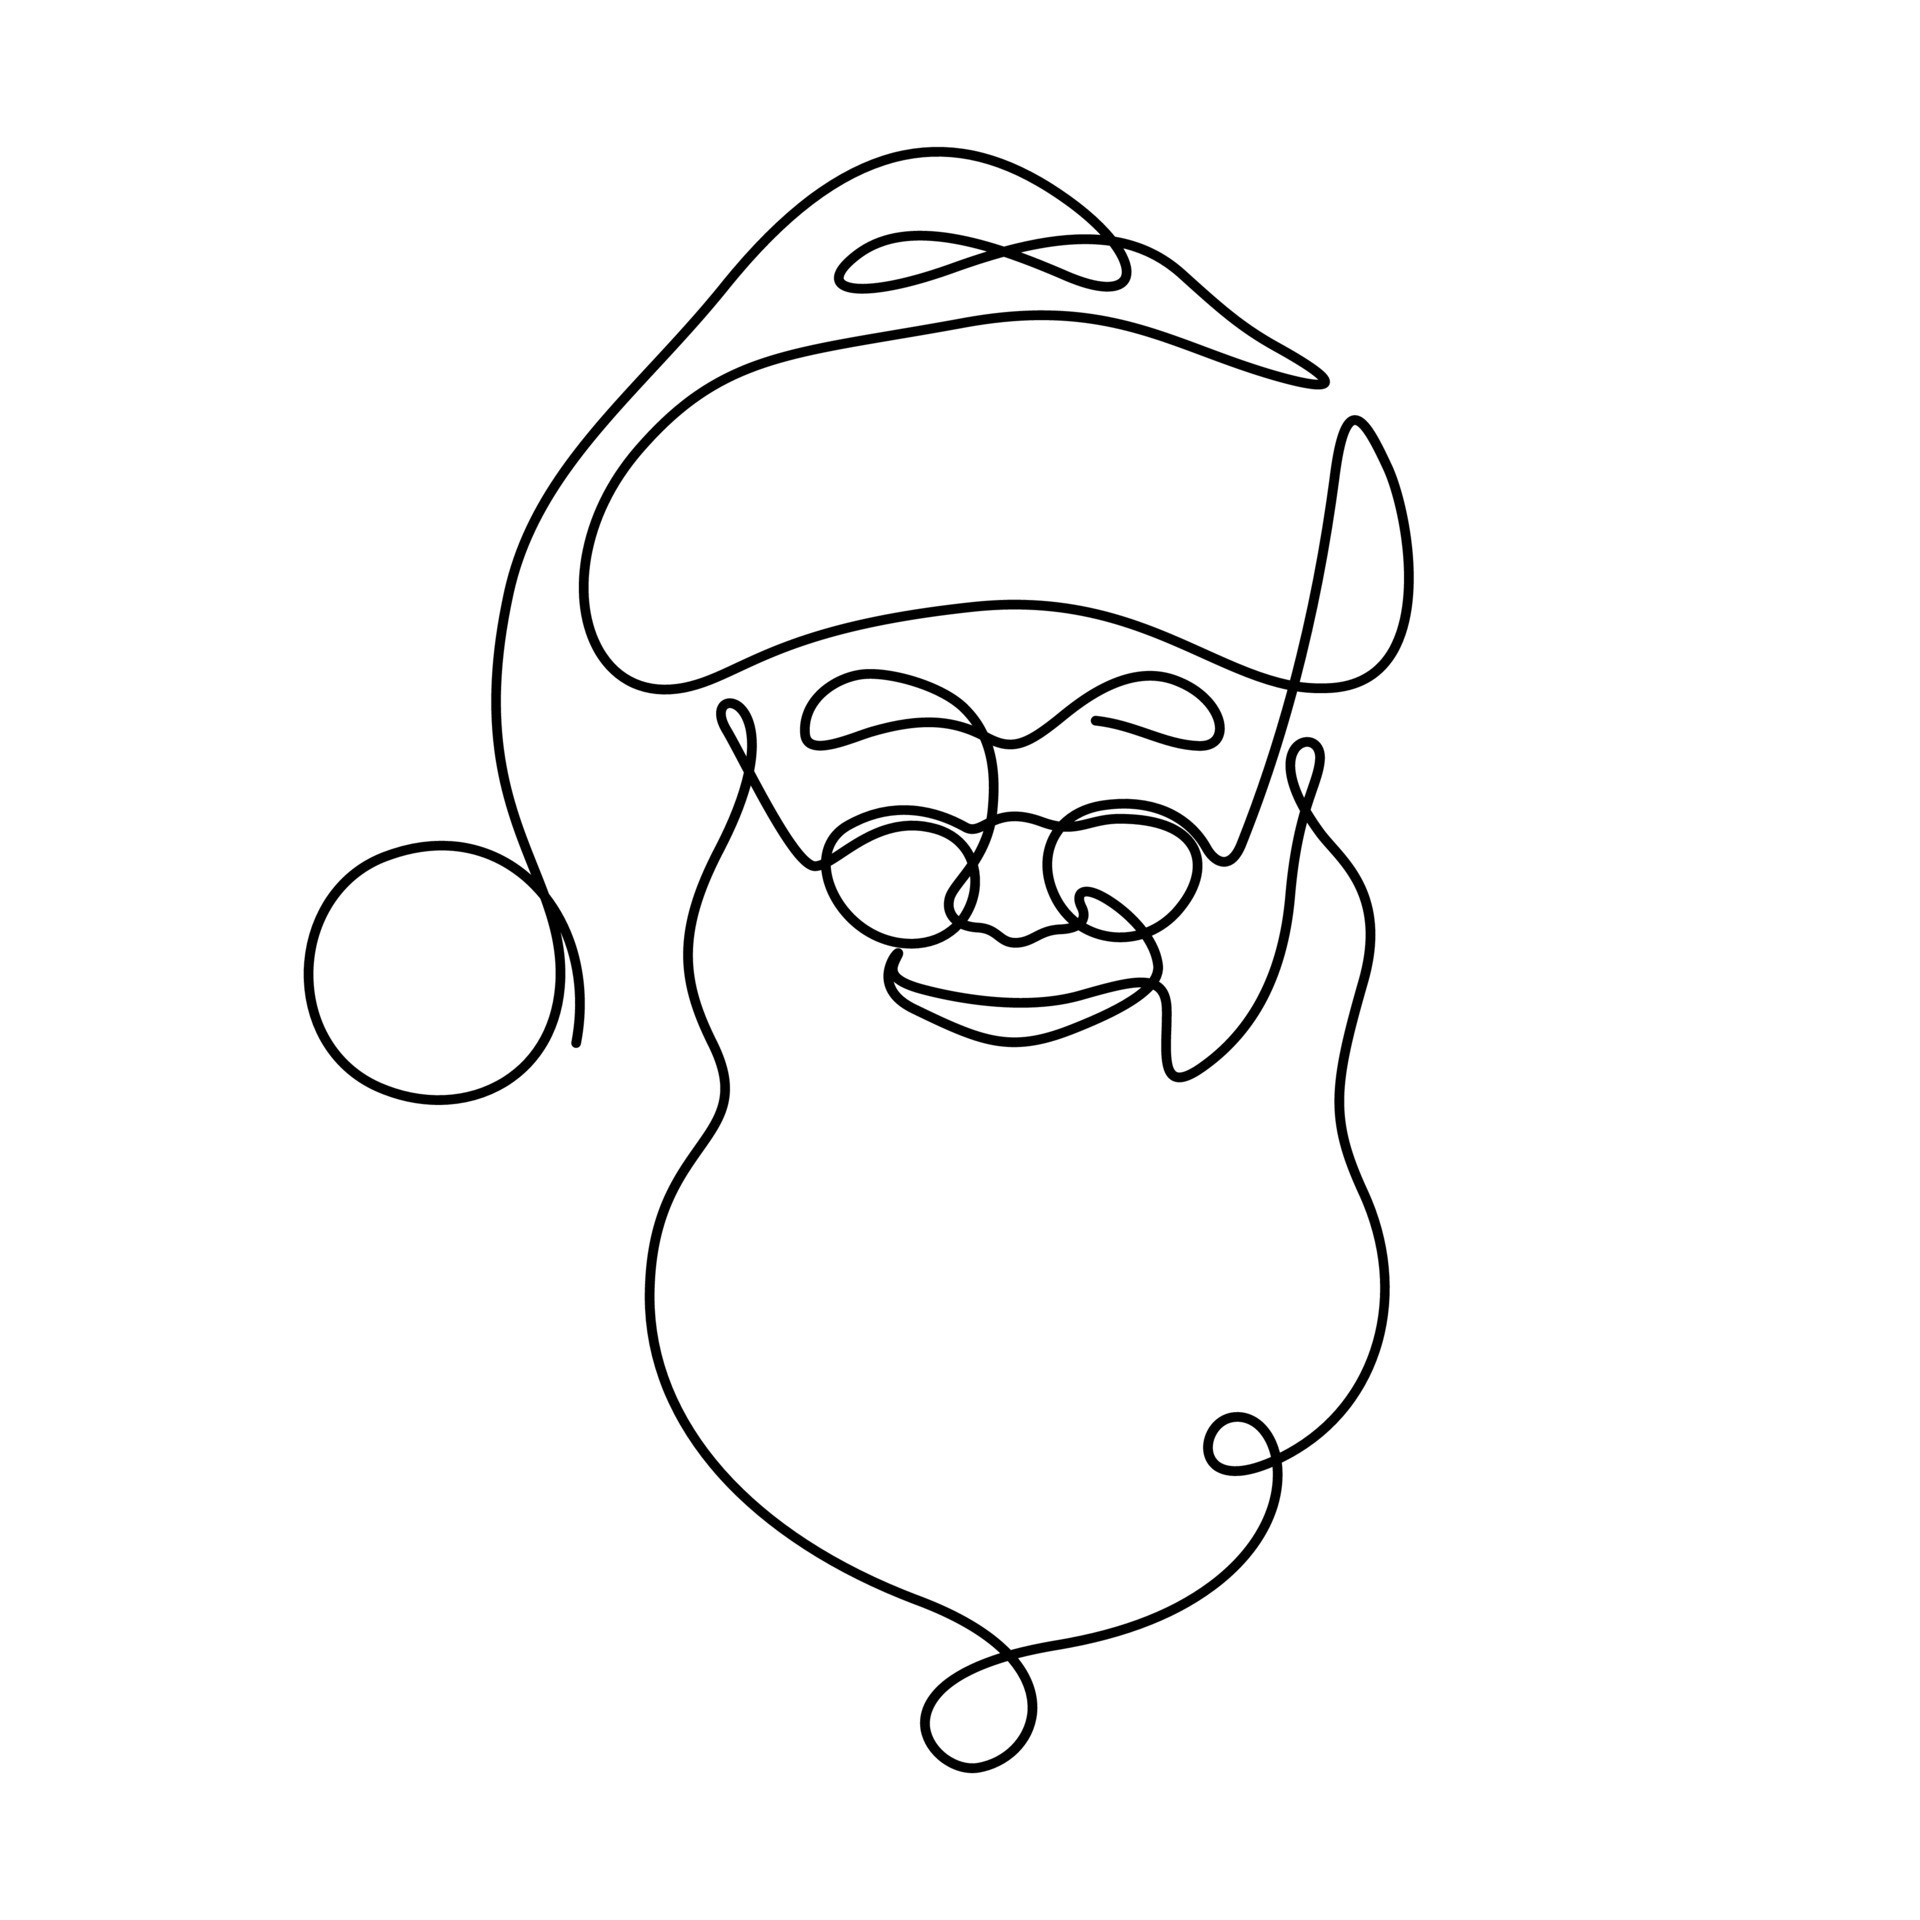 Cartoon Santa Face With Mustache Coloring Page Outline Sketch Drawing  Vector Santa Claus Face Drawing Santa Claus Face Outline Santa Claus  Face Sketch PNG and Vector with Transparent Background for Free Download